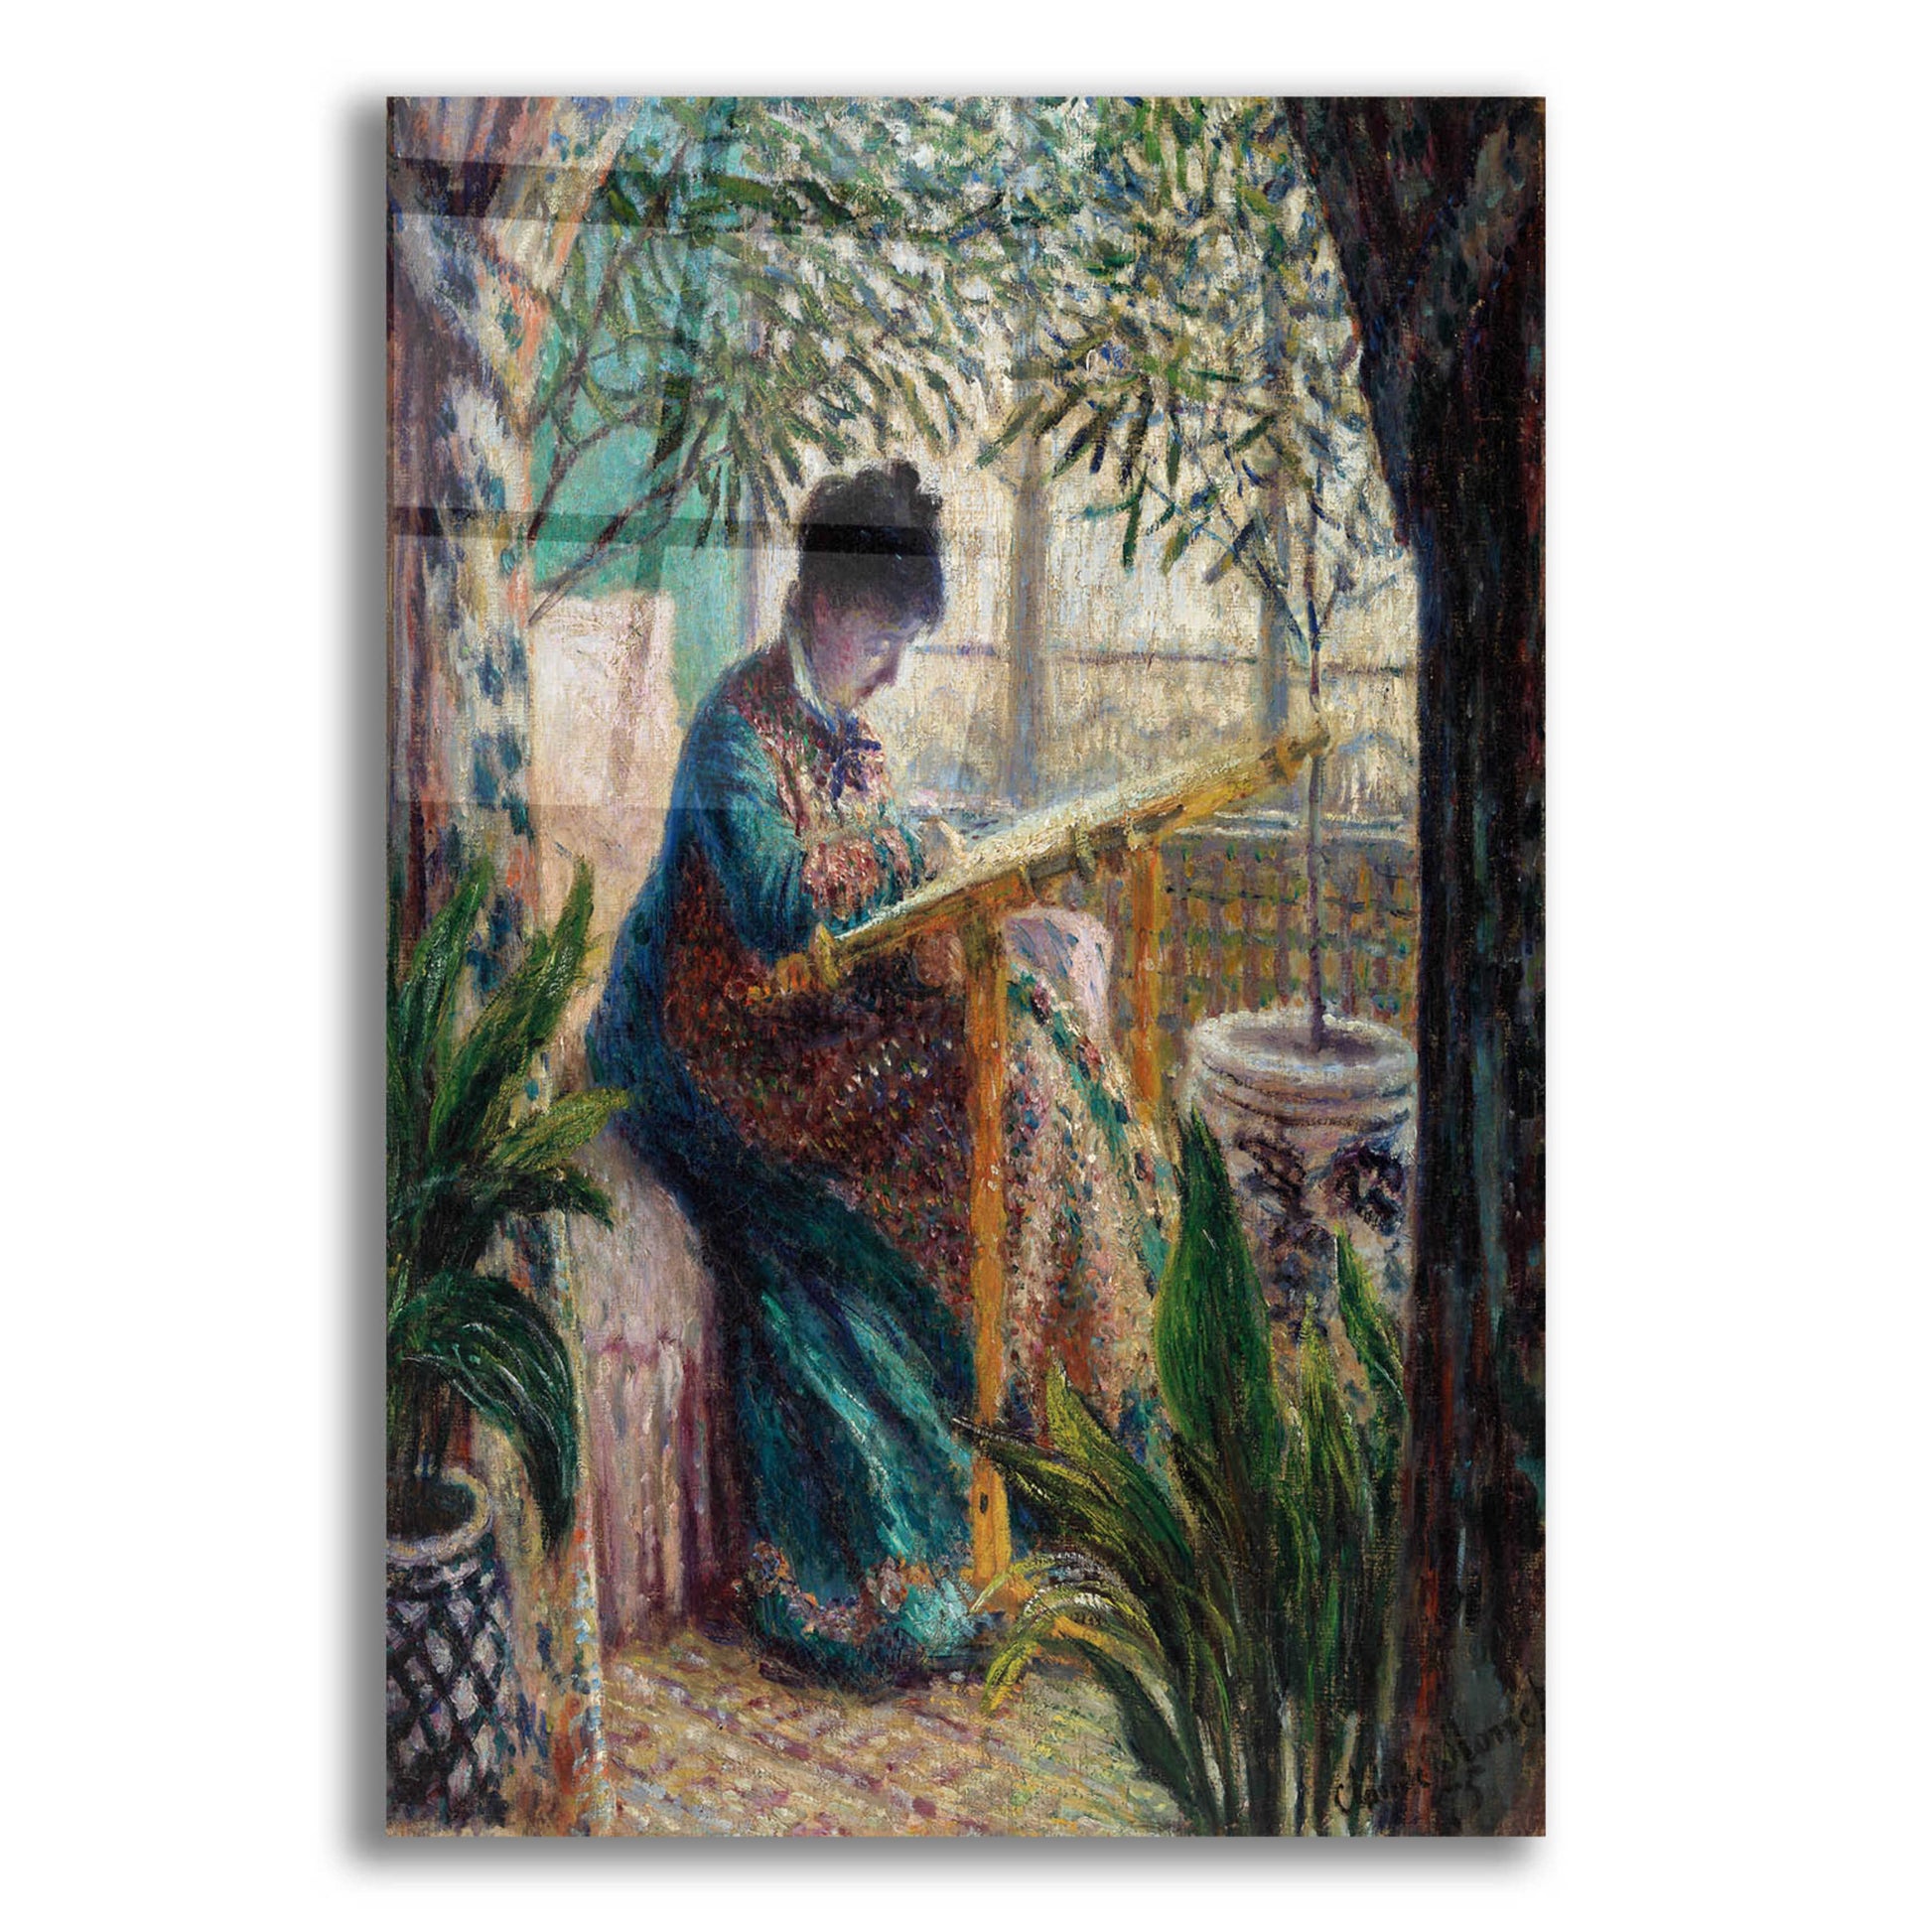 Epic Art 'Madame Monet Embroidering' by Claude Monet, Acrylic Glass Wall Art,16x24